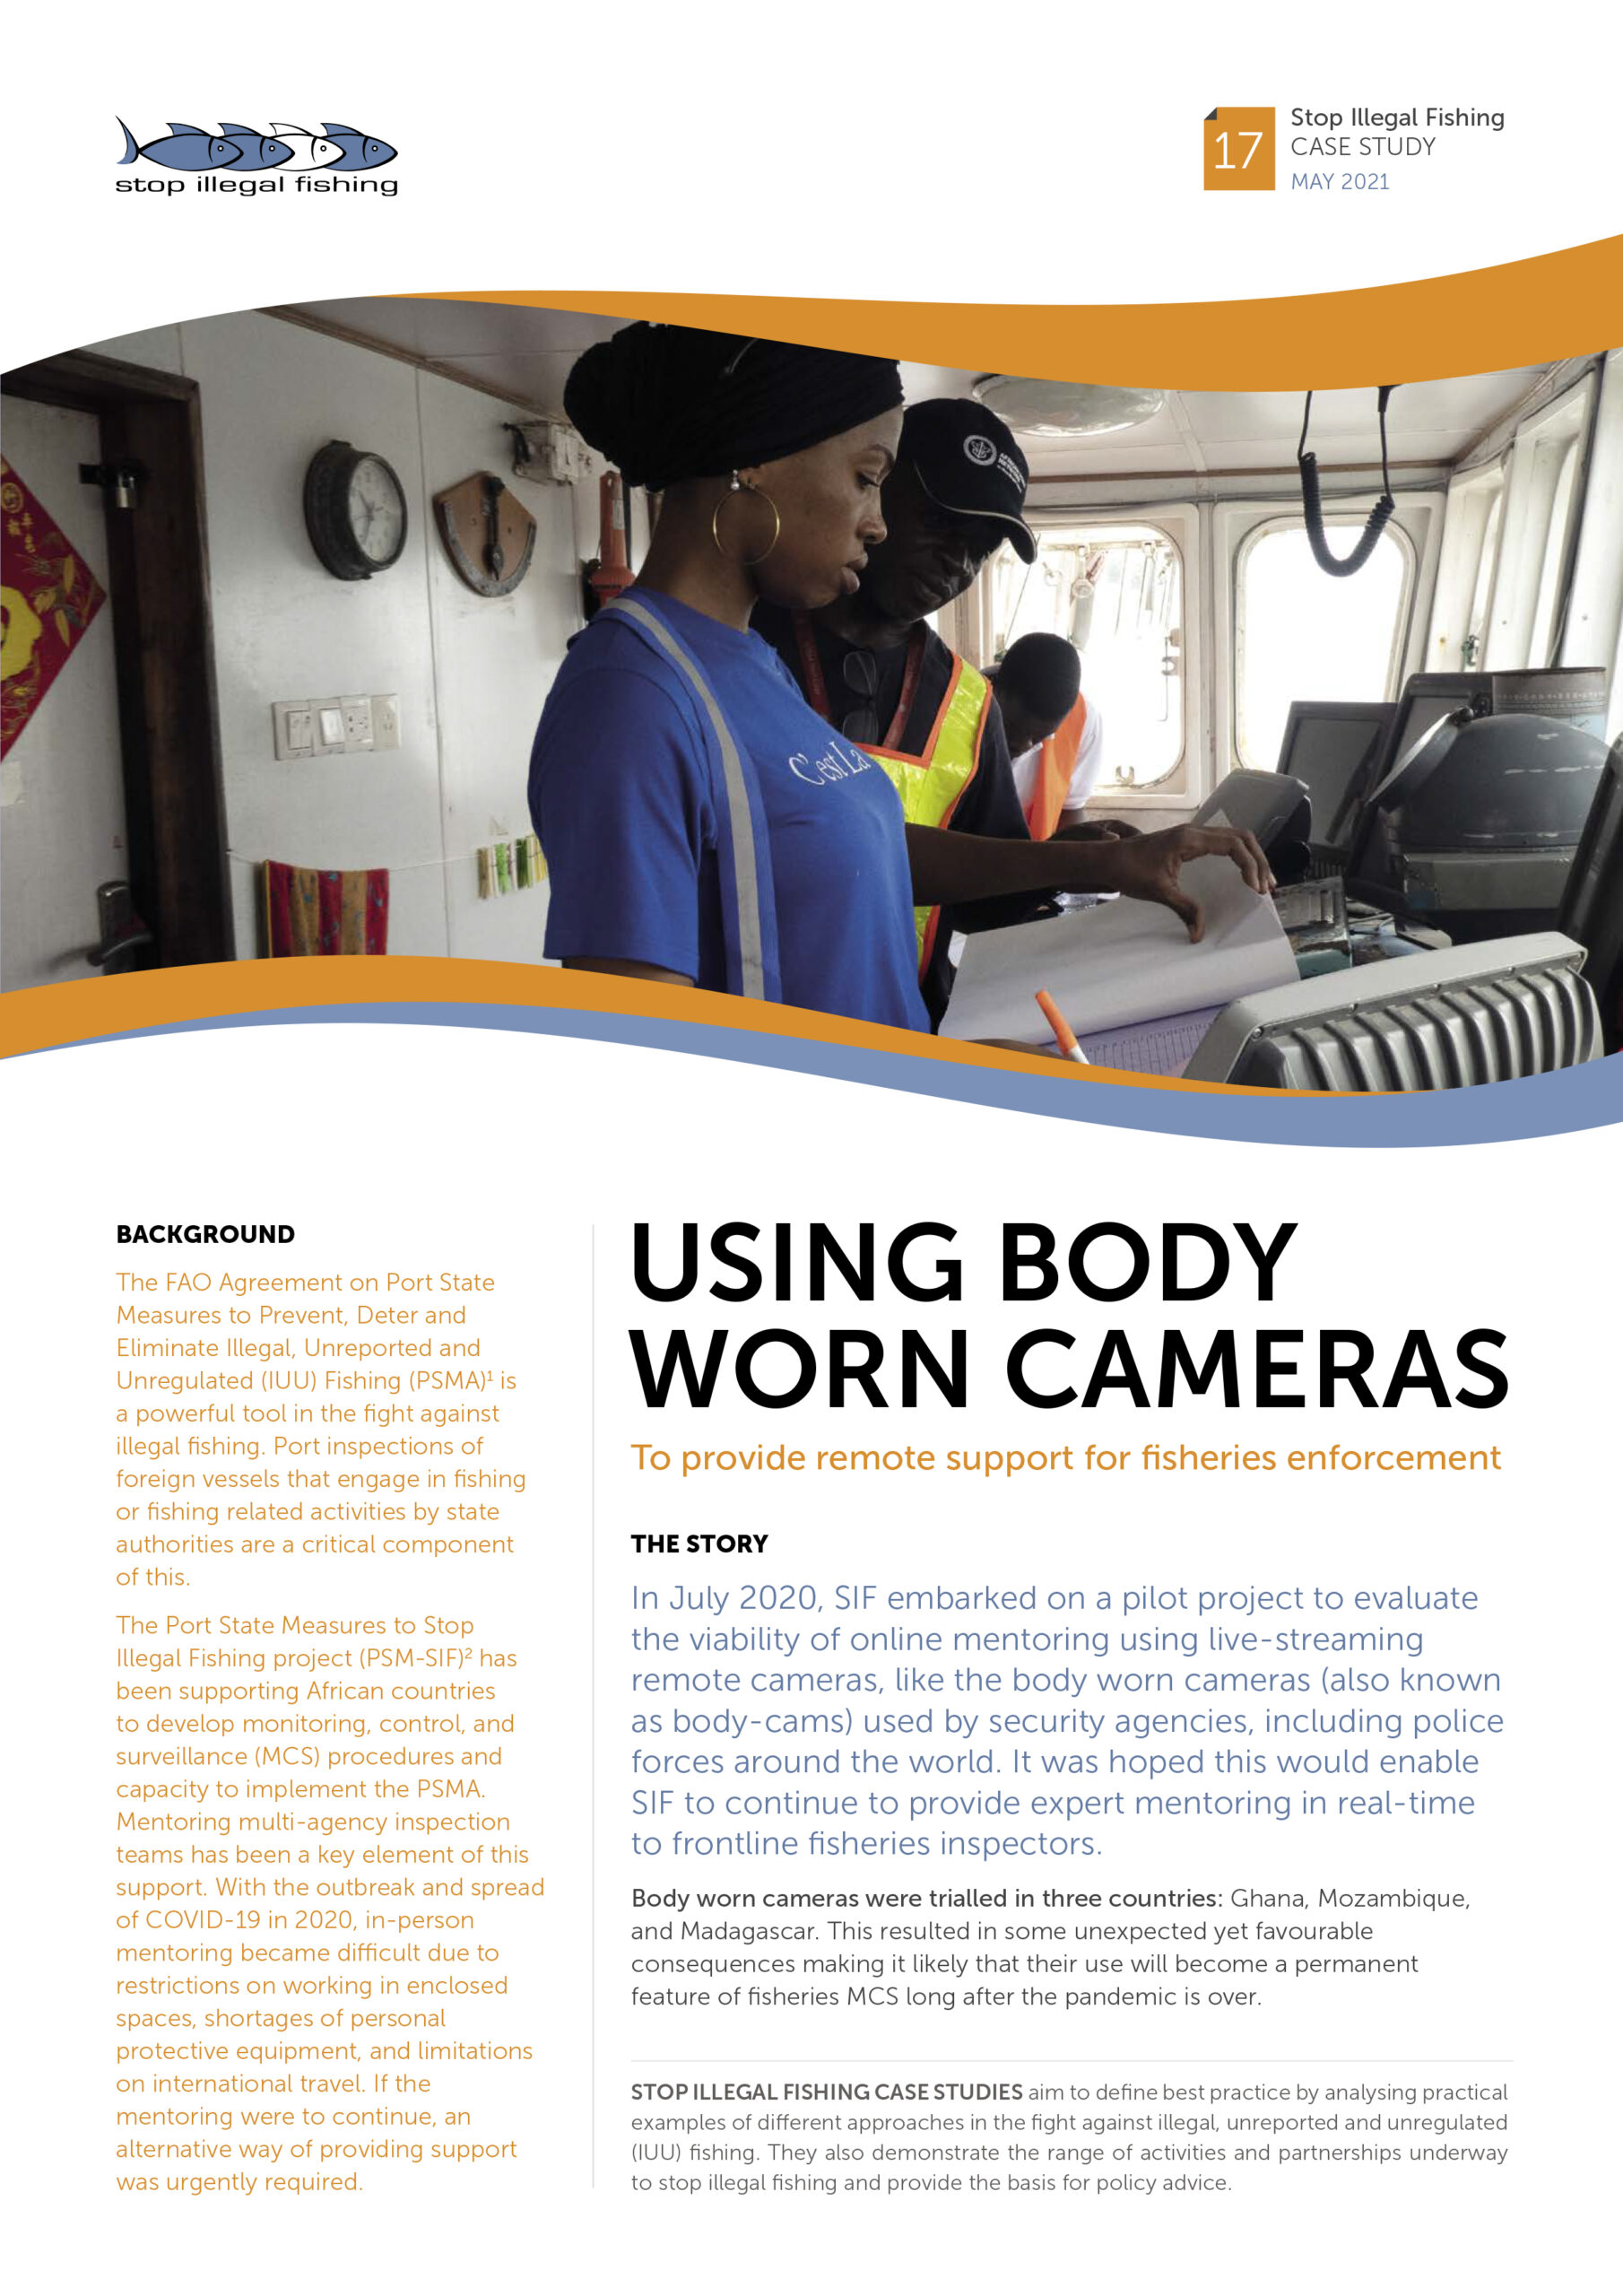 Using body worn cameras To provide remote support for fisheries enforcement